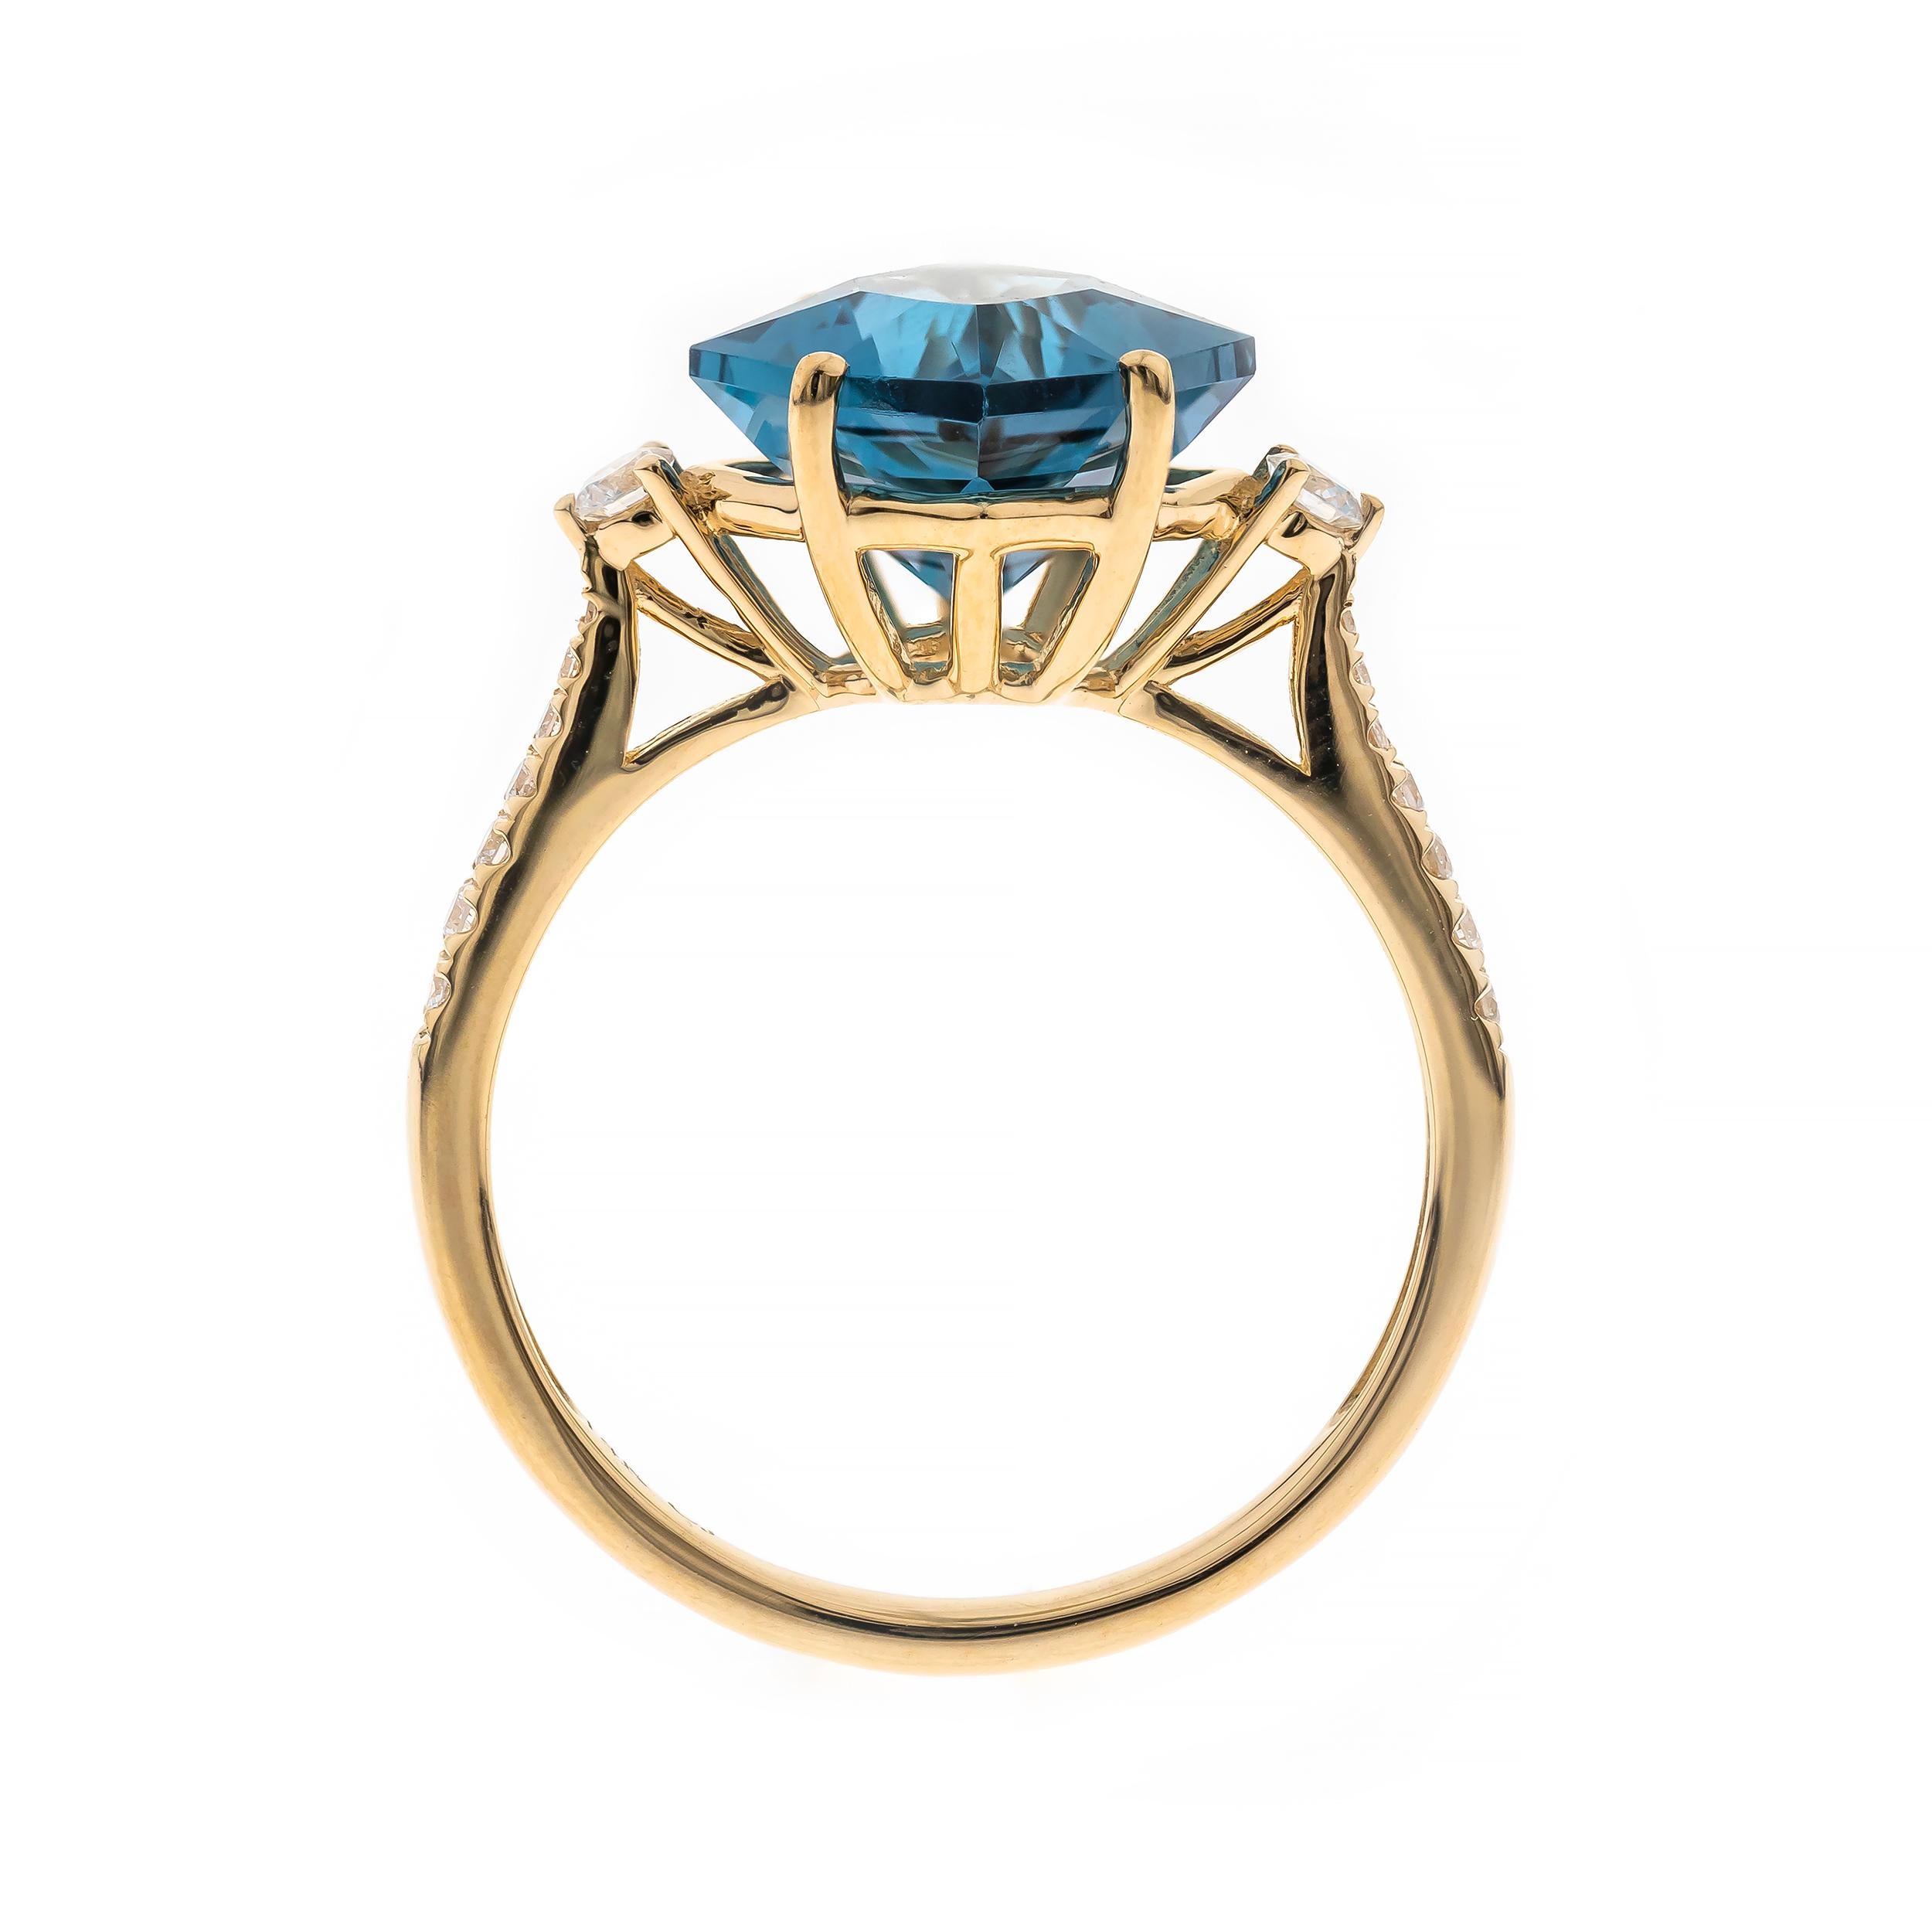 Decorate yourself in elegance with this Ring is crafted from 14-karat Yellow Gold by Gin & Grace. This Ring is made up of 10x13 mm Marquise-Cut (1 pcs) 4.63 carat London Blue Topaz and Round-cut White Diamond (16 Pcs) 0.15 Carat. This Ring is weight